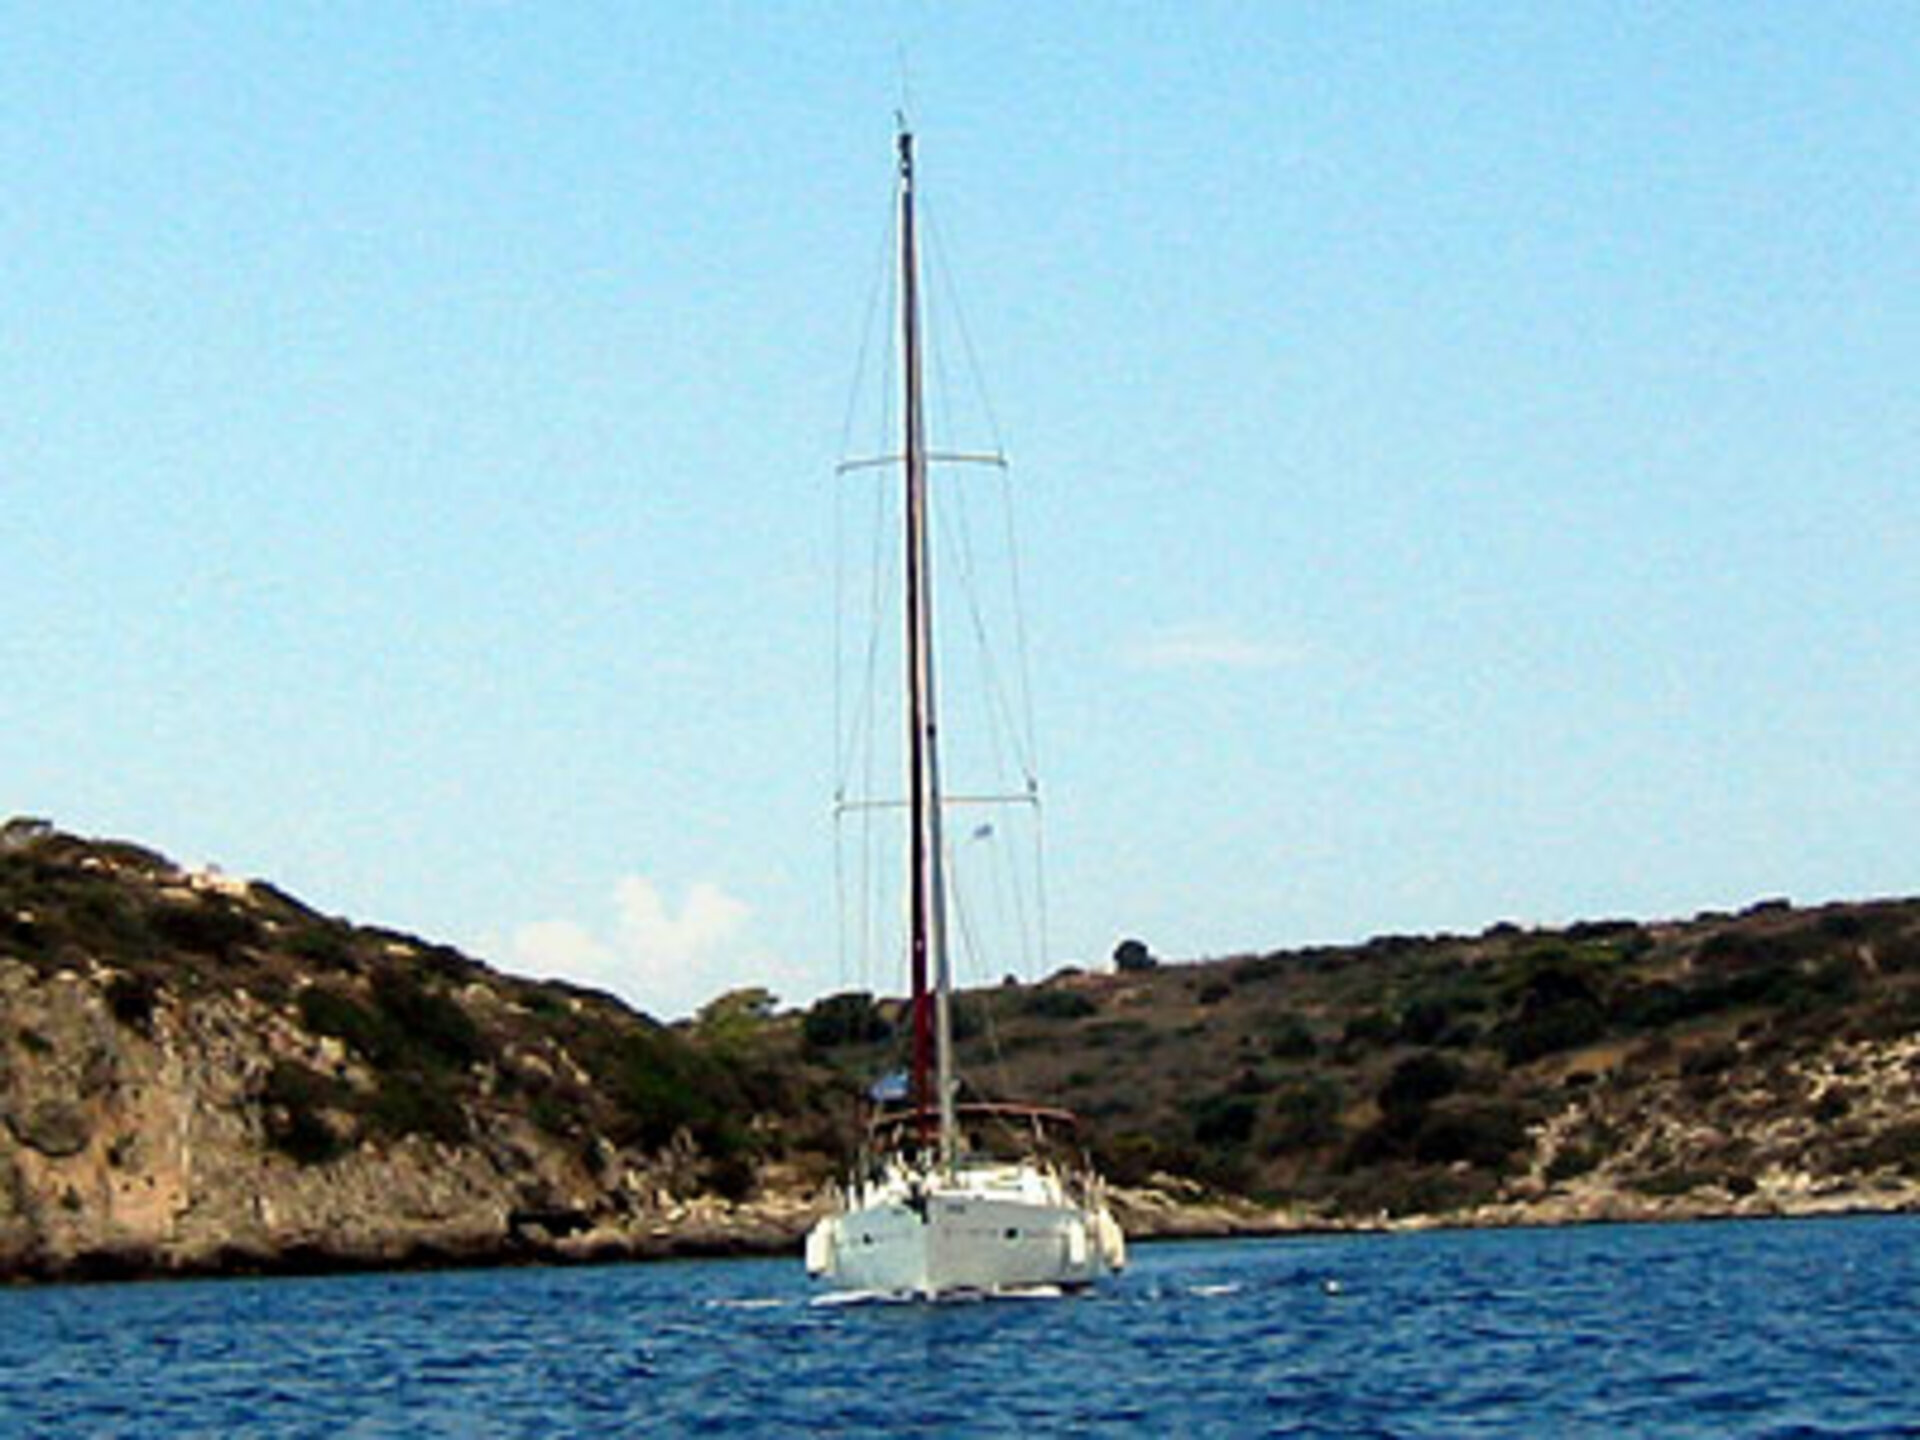 Boat used for demonstration offshore of Athens